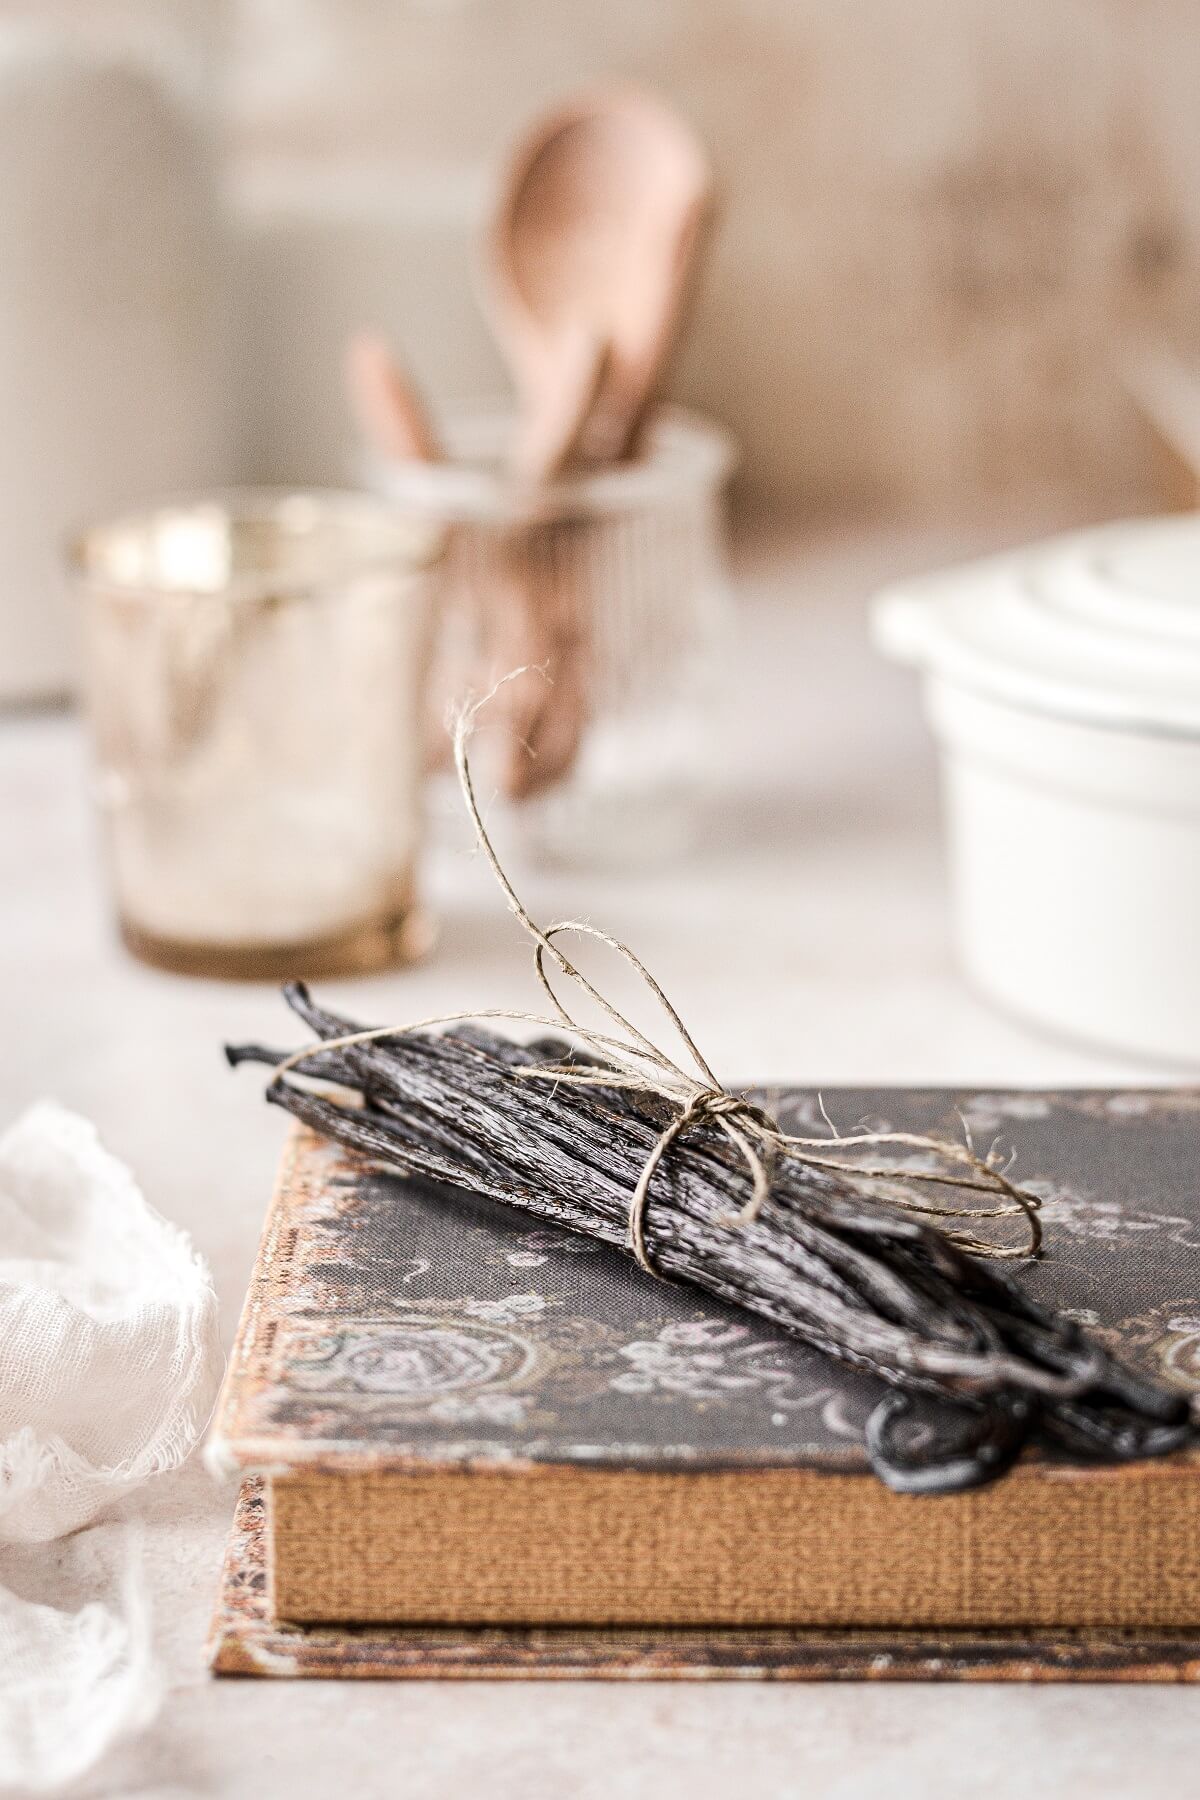 Vanilla beans tied with twine.